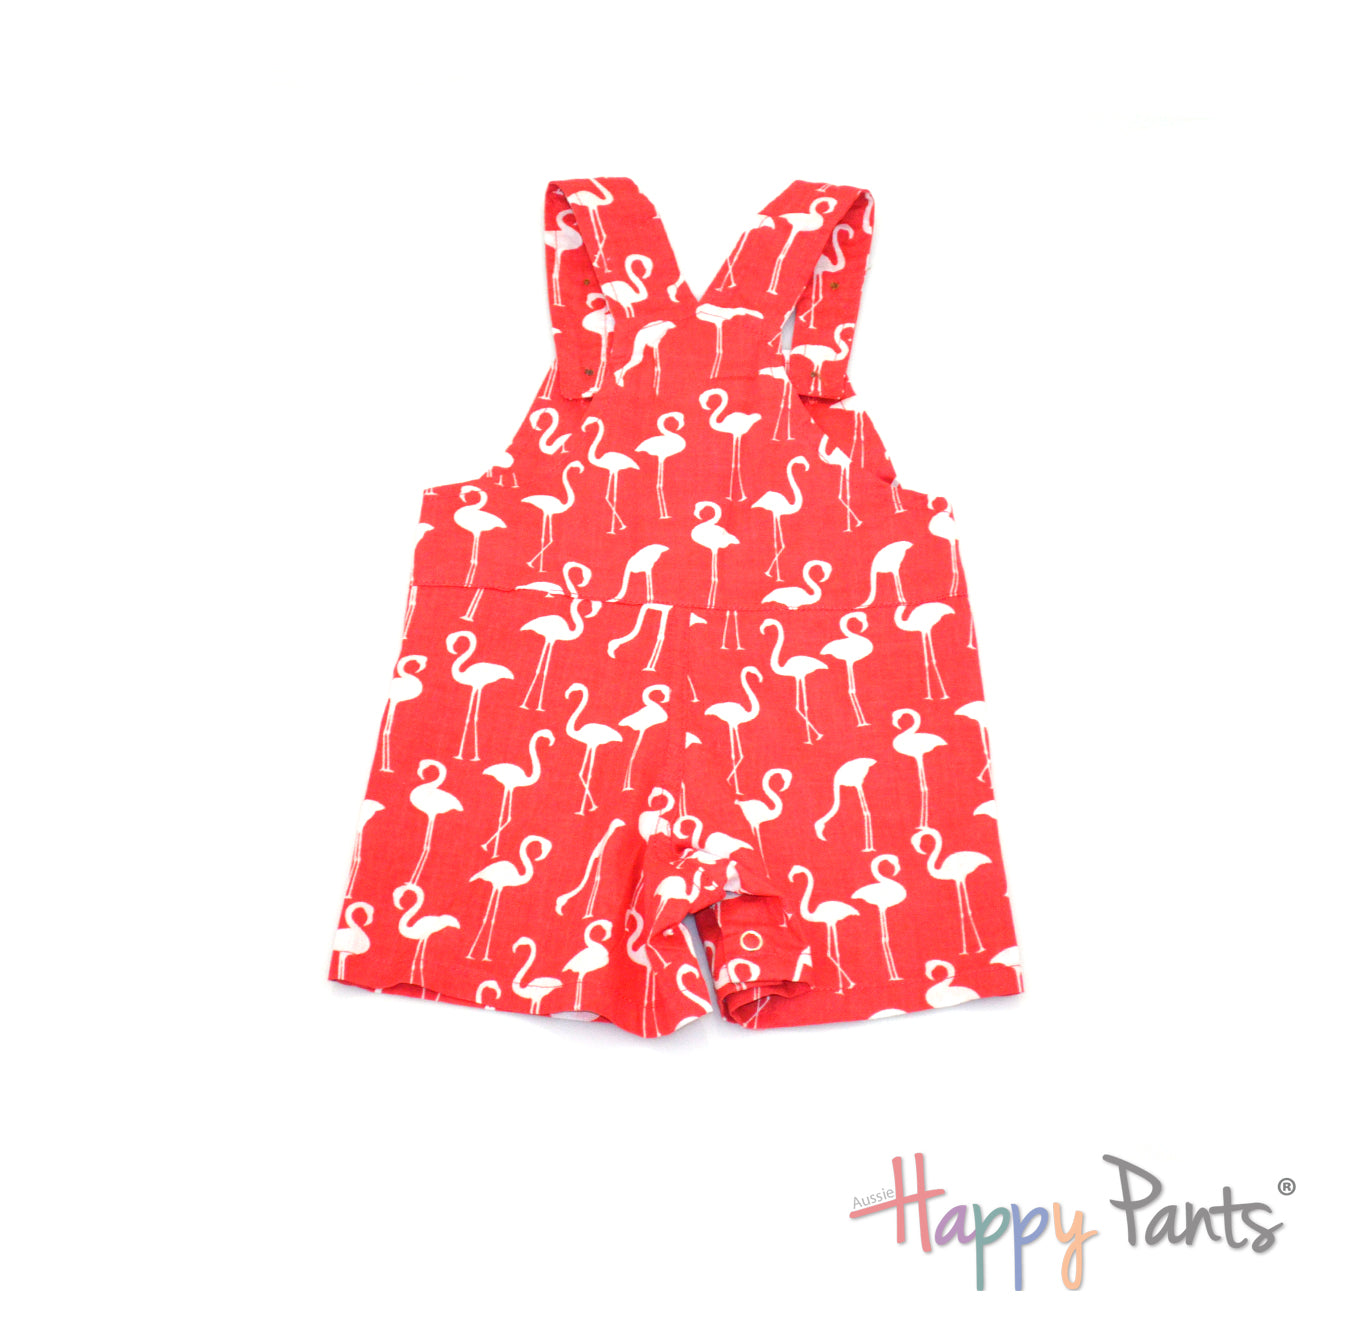 Happy Flamingo Short Overall for Girls